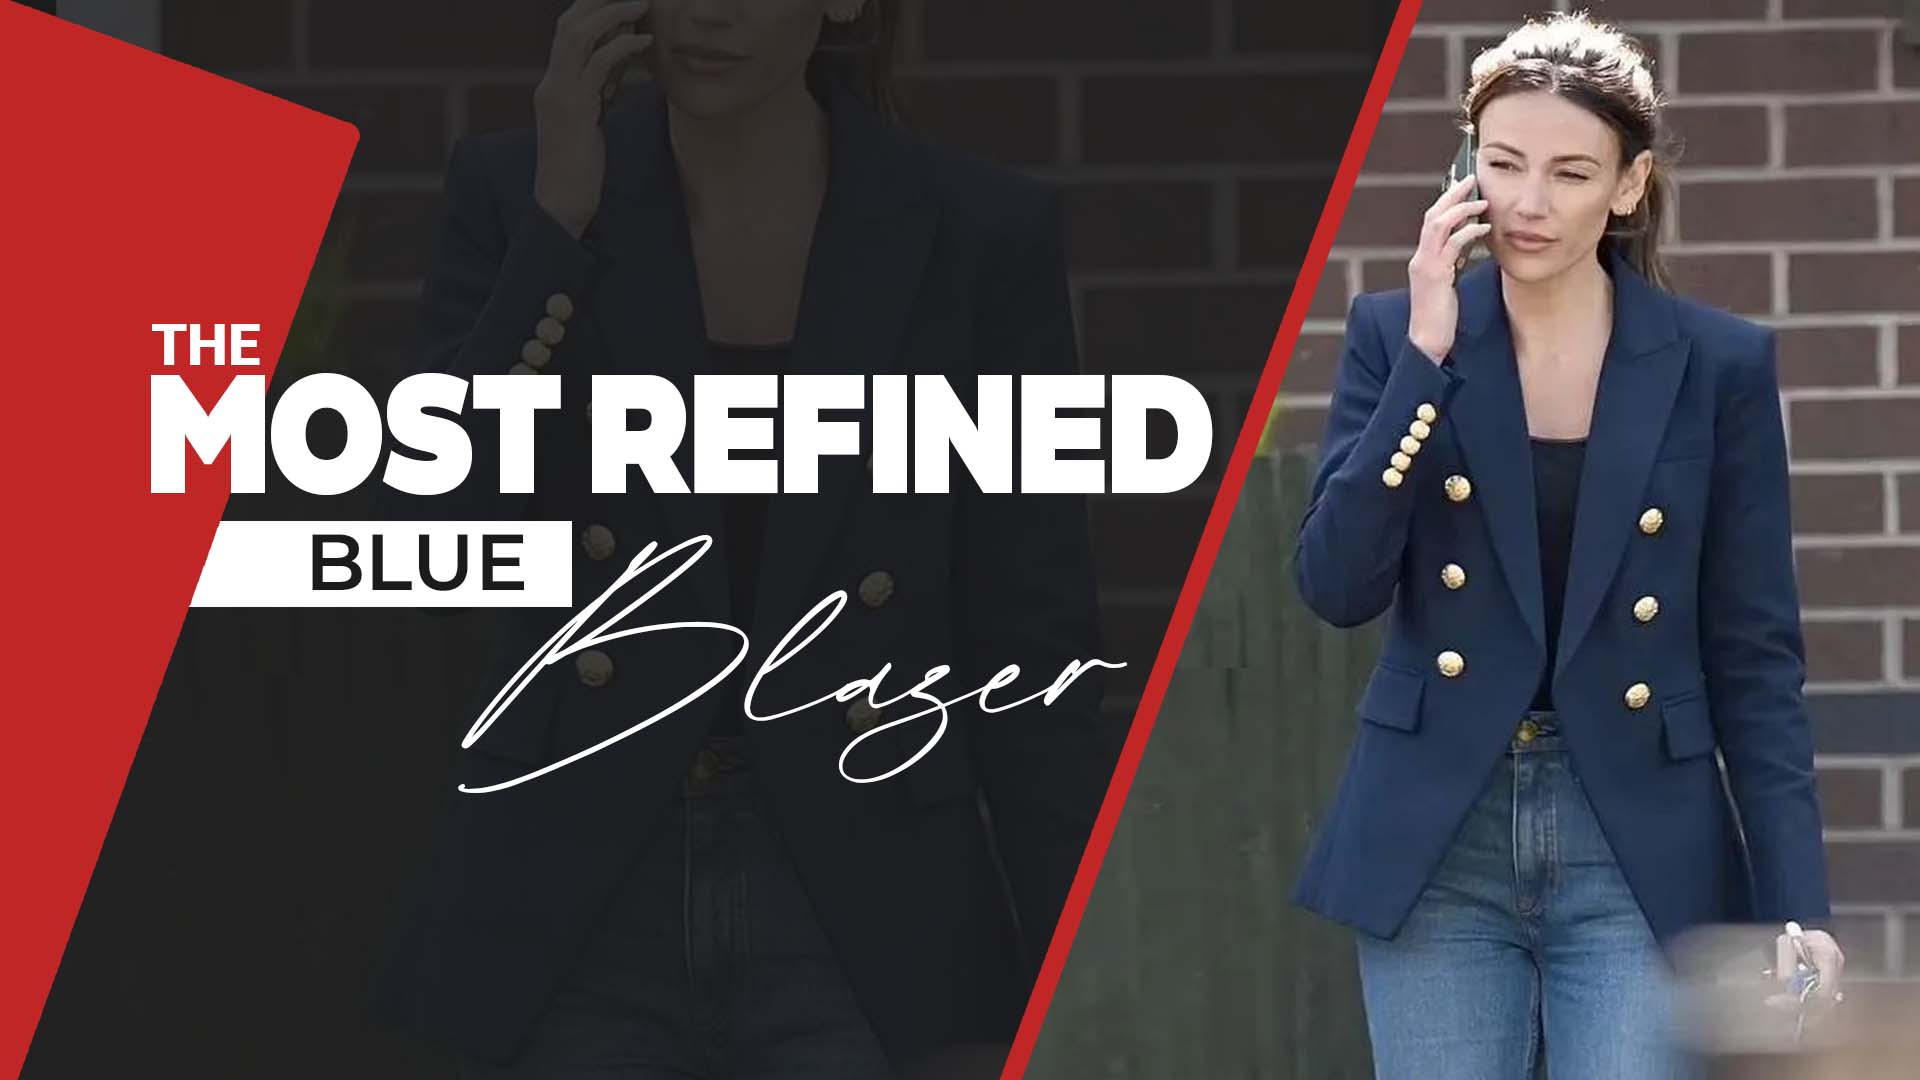 The Most Refined Blue Blazer